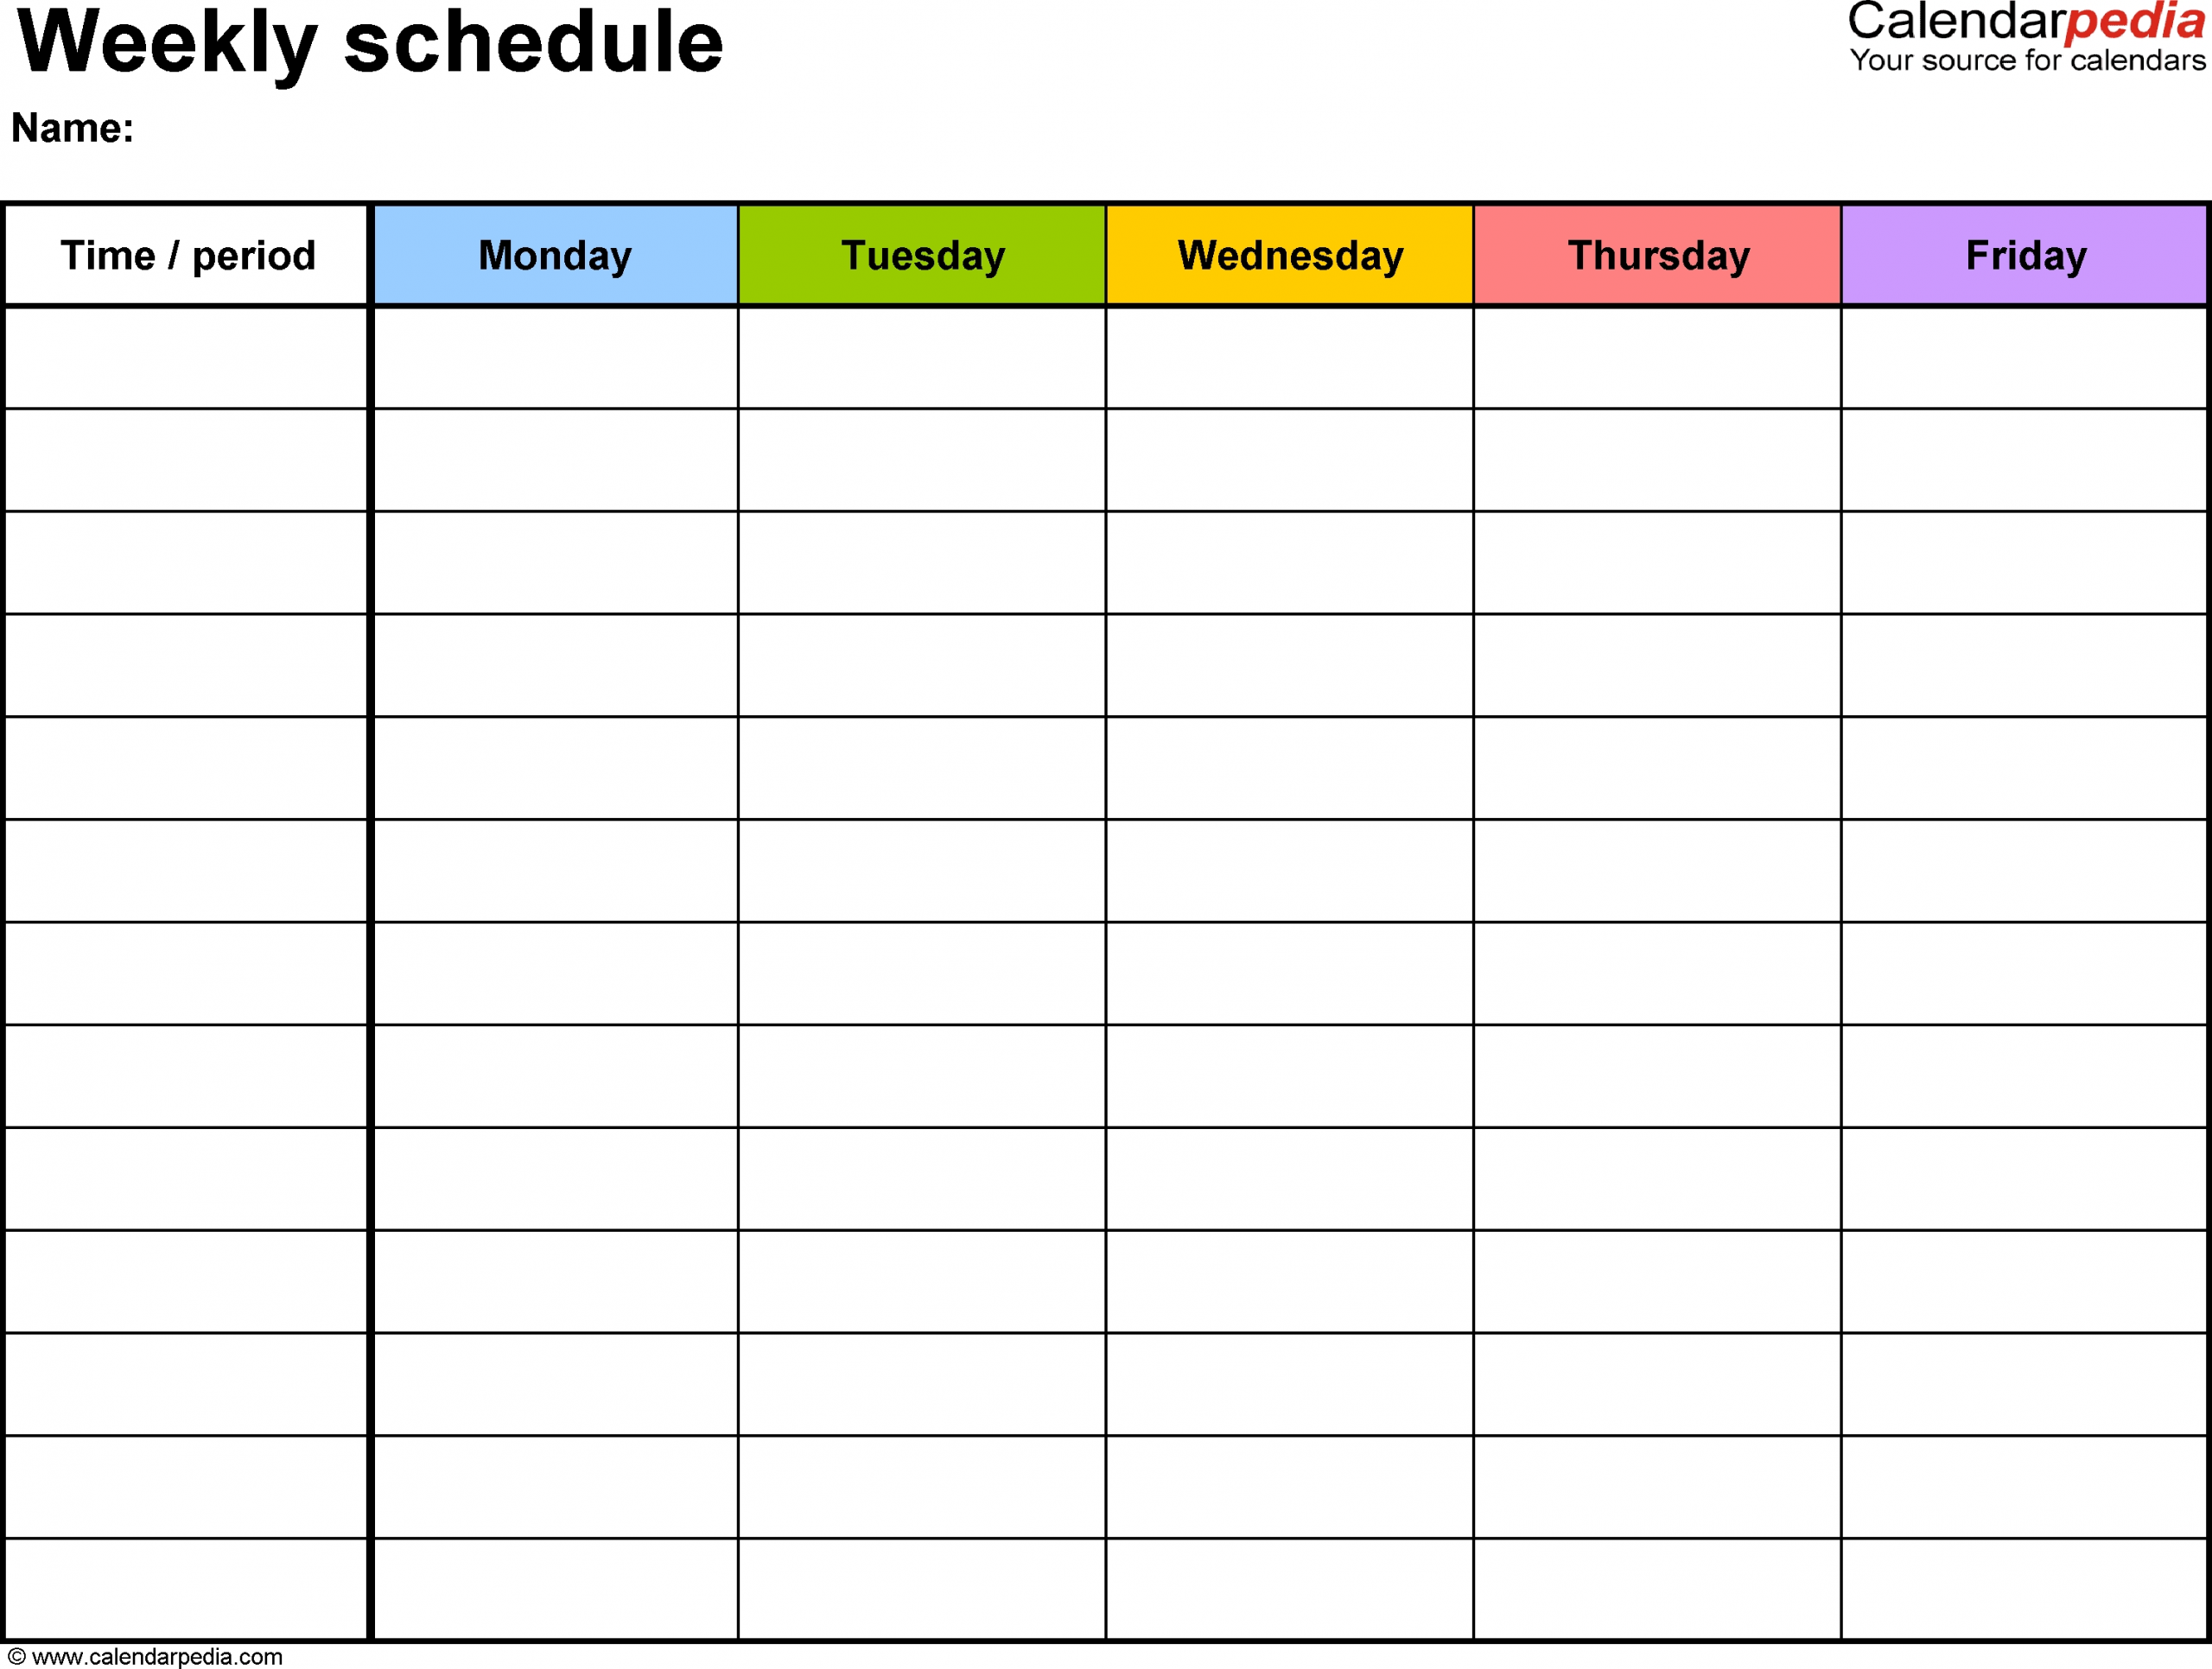 Free Weekly Schedule Templates For Word - 18 Templates regarding Monday Through Friday Calendar With Times